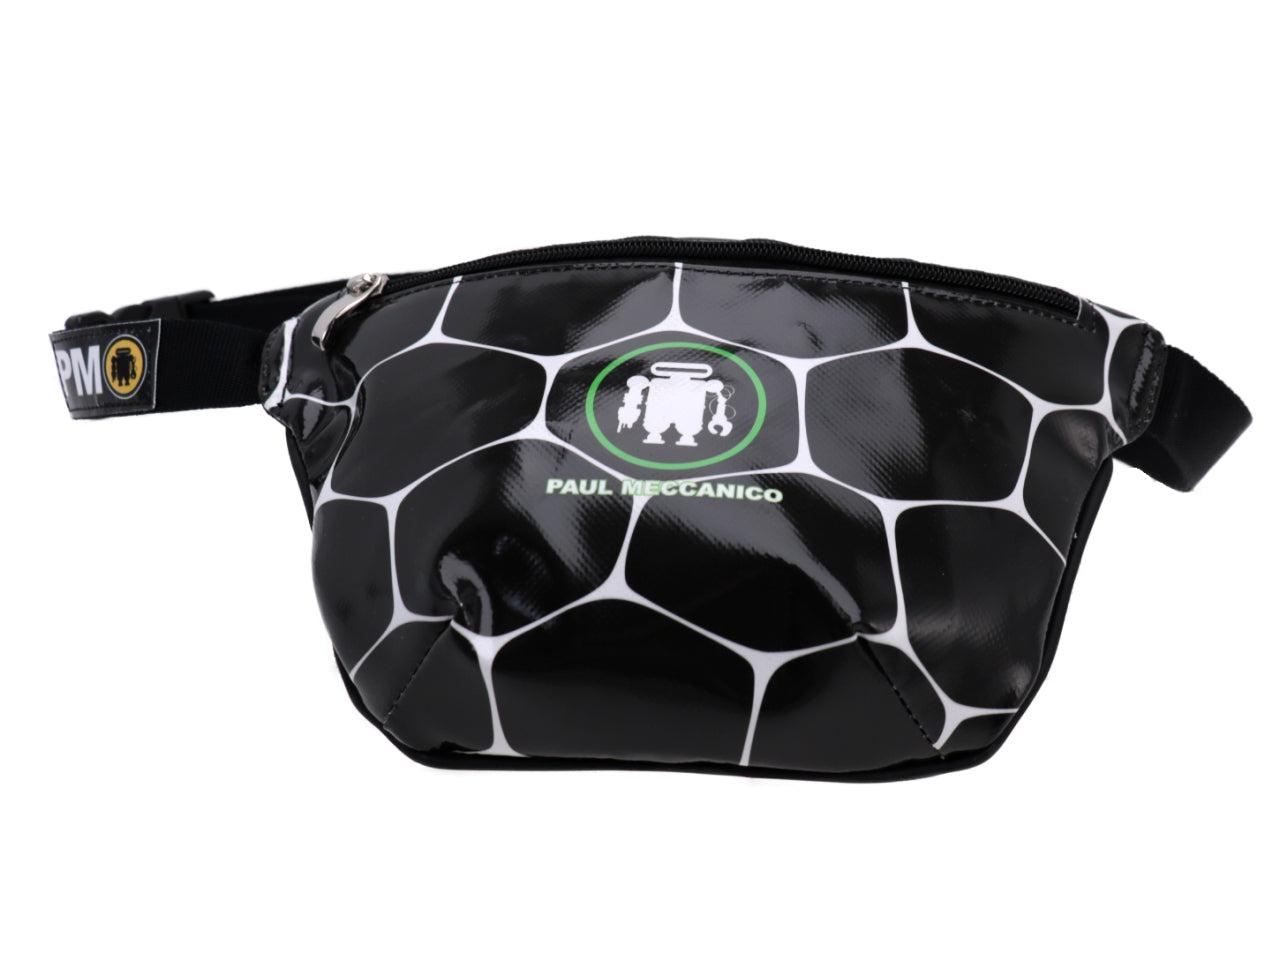 BLACK AND WHITE WAIST BAG WITH OPTICAL FANTASY. MODEL FLEX MADE OF LORRY TARPAULIN. - Limited Edition Paul Meccanico